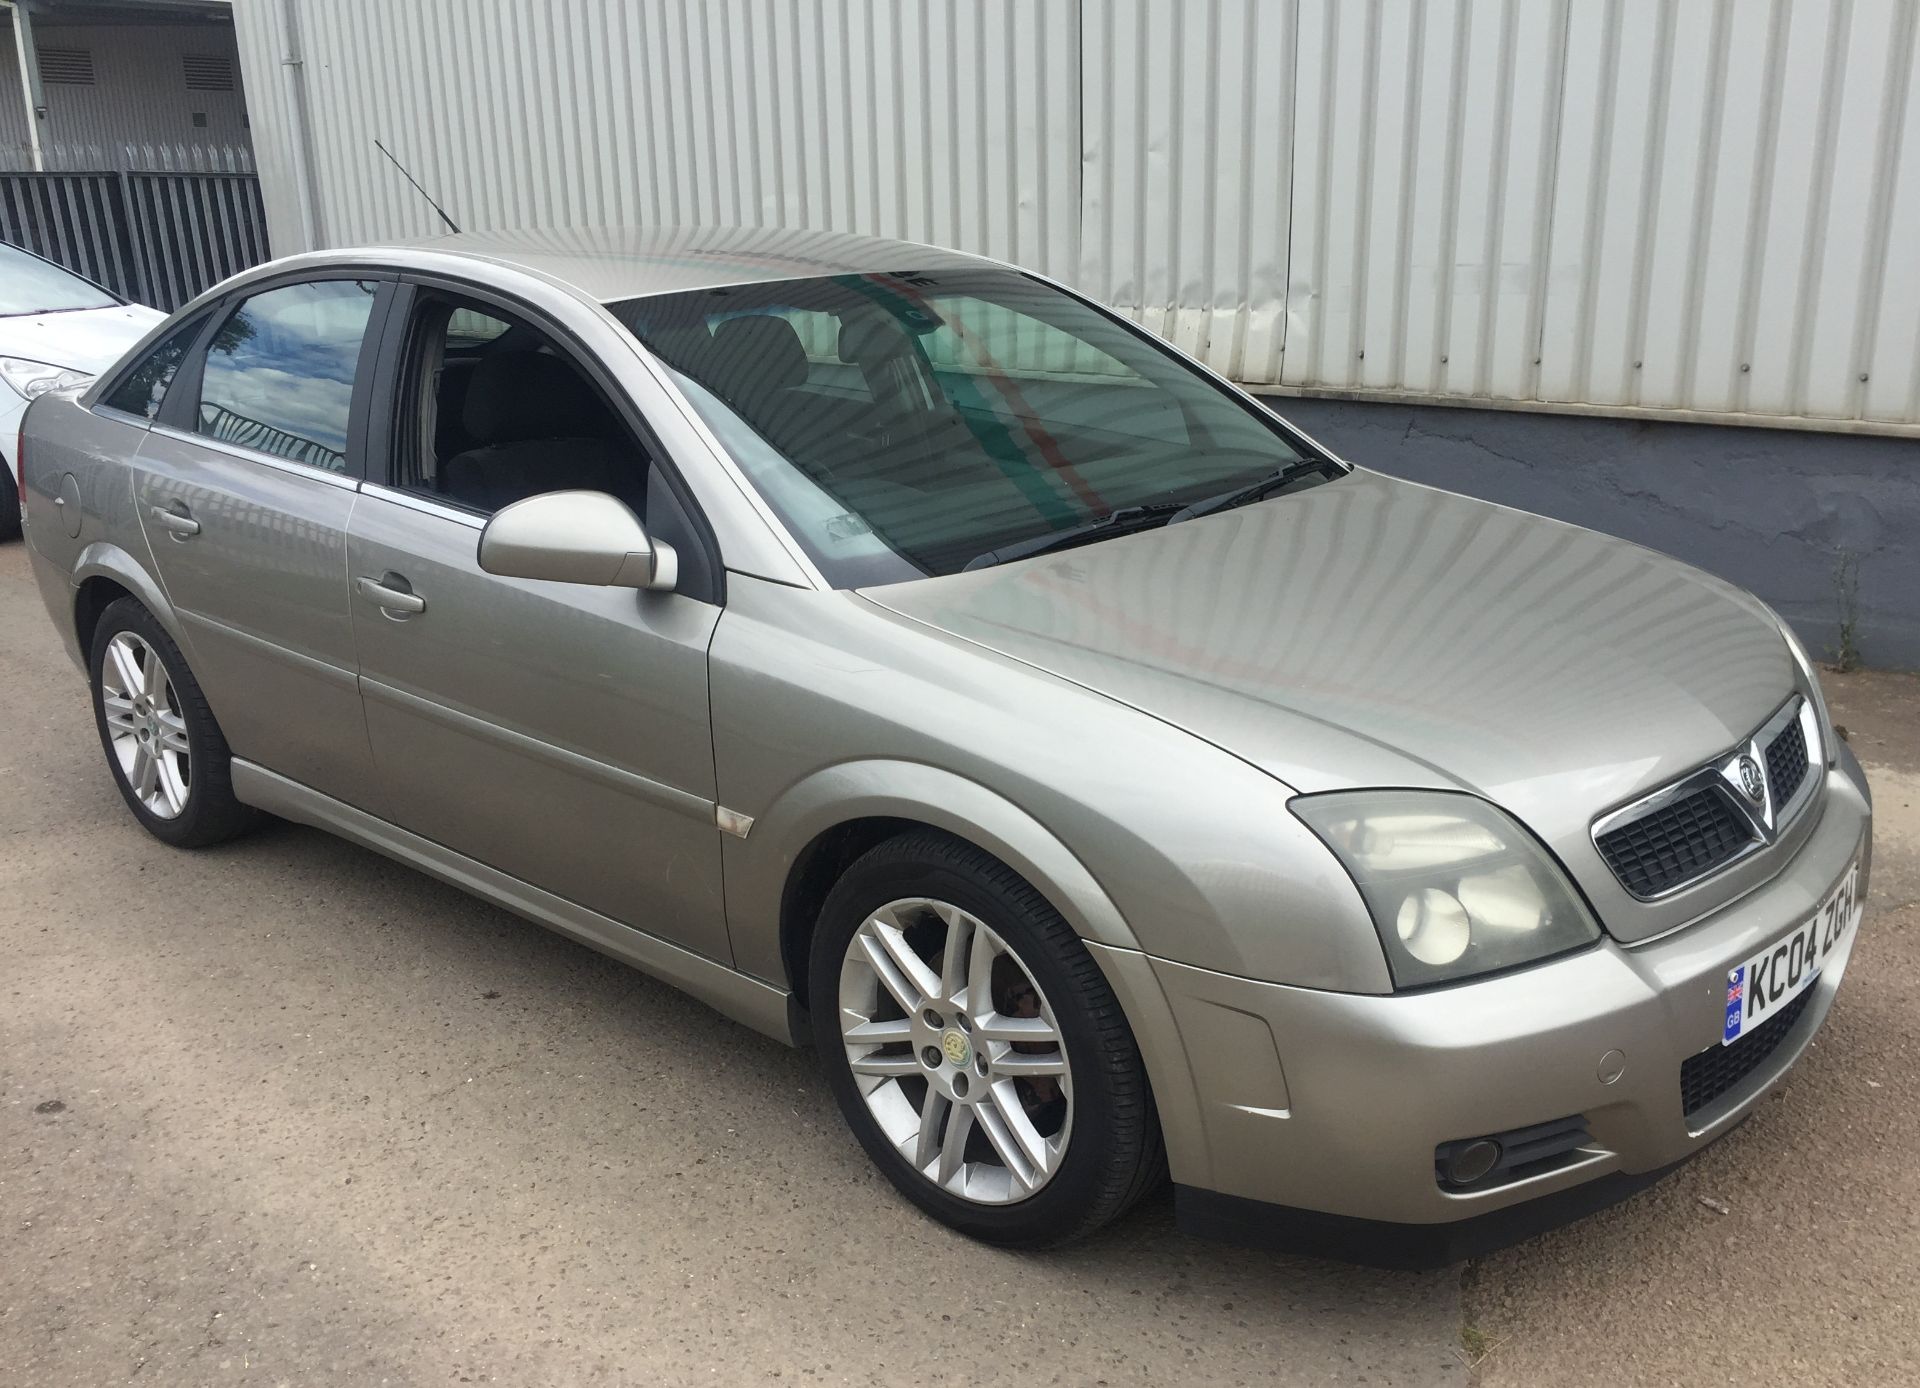 2004 Vauxhall Vectra 2.2 Sri Automatic 4 Dr Saloon - CL505 - NO VAT ON THE HAMMER - Location: